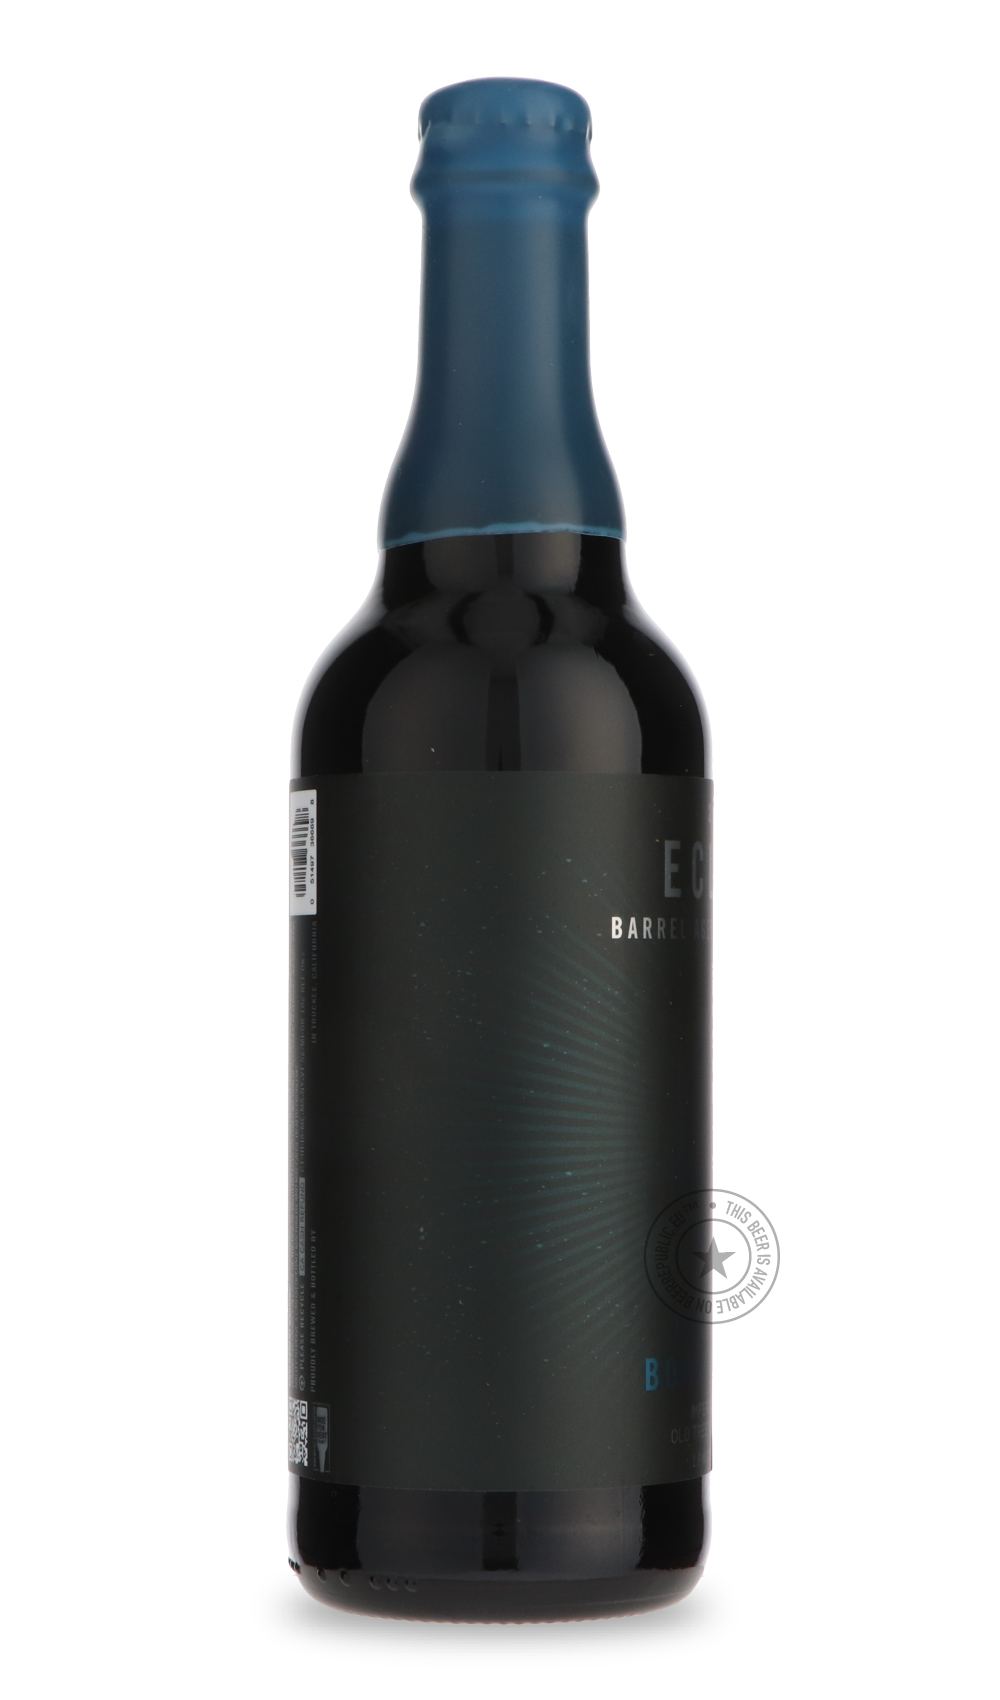 -FiftyFifty- Eclipse - Old Trestle (2022)-Stout & Porter- Only @ Beer Republic - The best online beer store for American & Canadian craft beer - Buy beer online from the USA and Canada - Bier online kopen - Amerikaans bier kopen - Craft beer store - Craft beer kopen - Amerikanisch bier kaufen - Bier online kaufen - Acheter biere online - IPA - Stout - Porter - New England IPA - Hazy IPA - Imperial Stout - Barrel Aged - Barrel Aged Imperial Stout - Brown - Dark beer - Blond - Blonde - Pilsner - Lager - Wheat